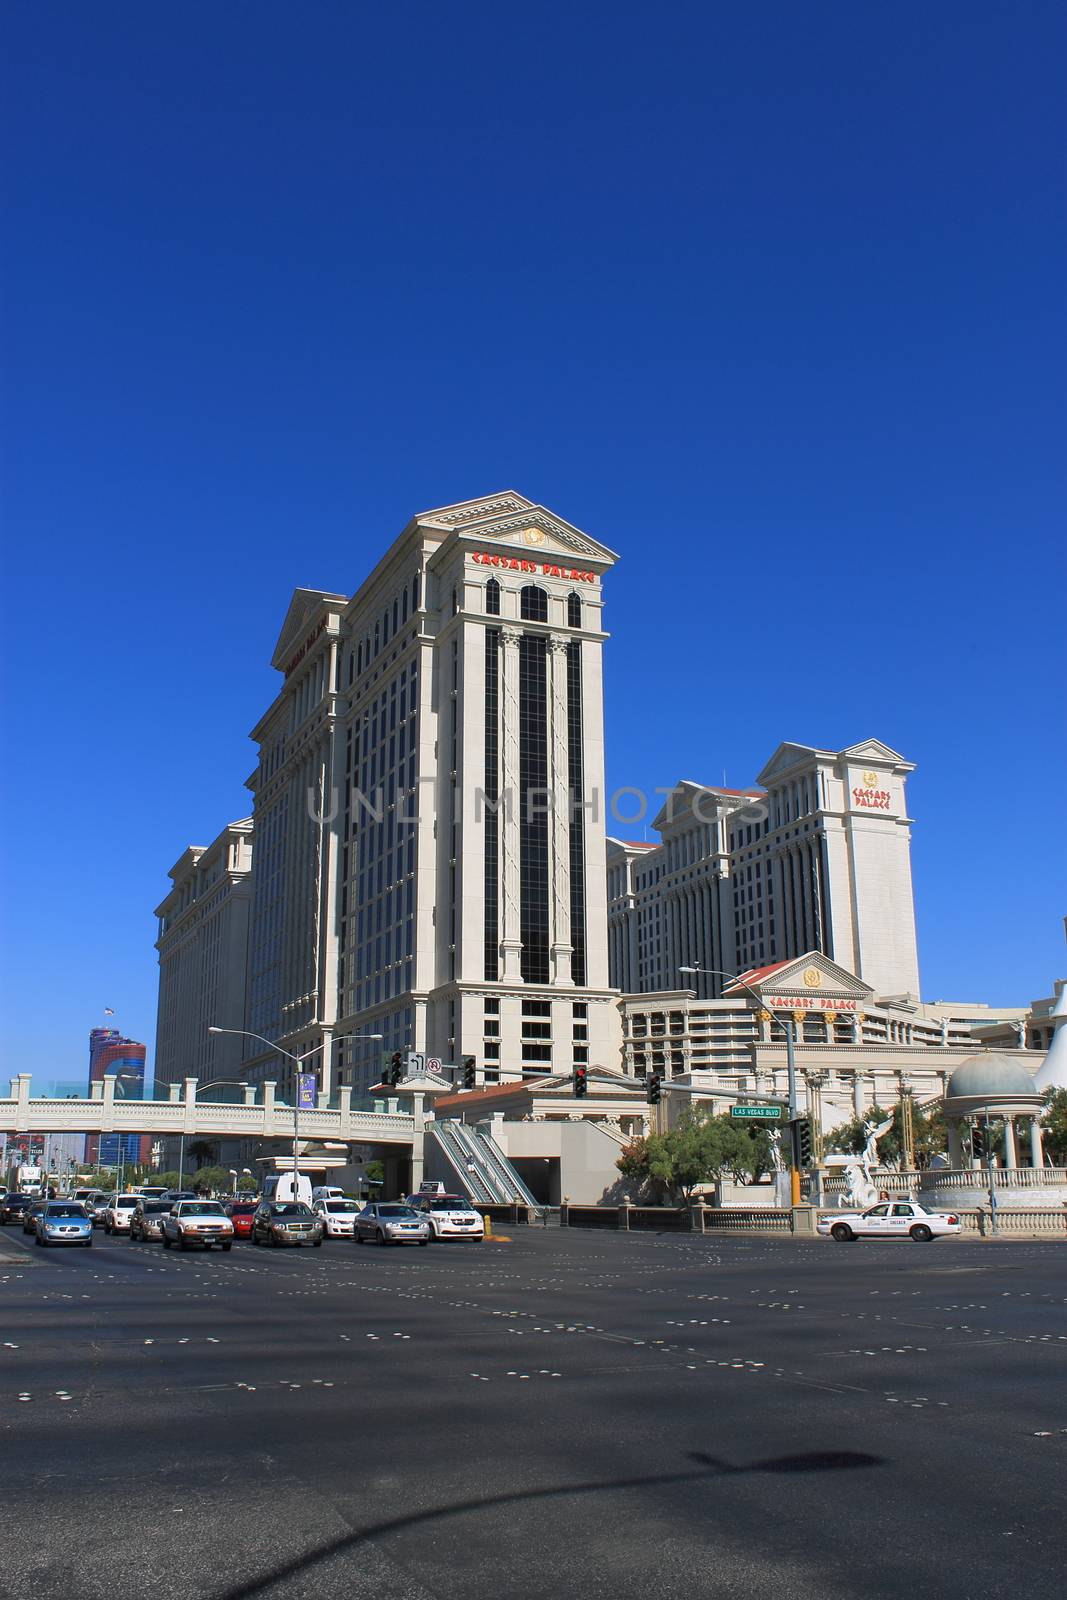 Las Vegas - Caesars Palace Hotel by Ffooter